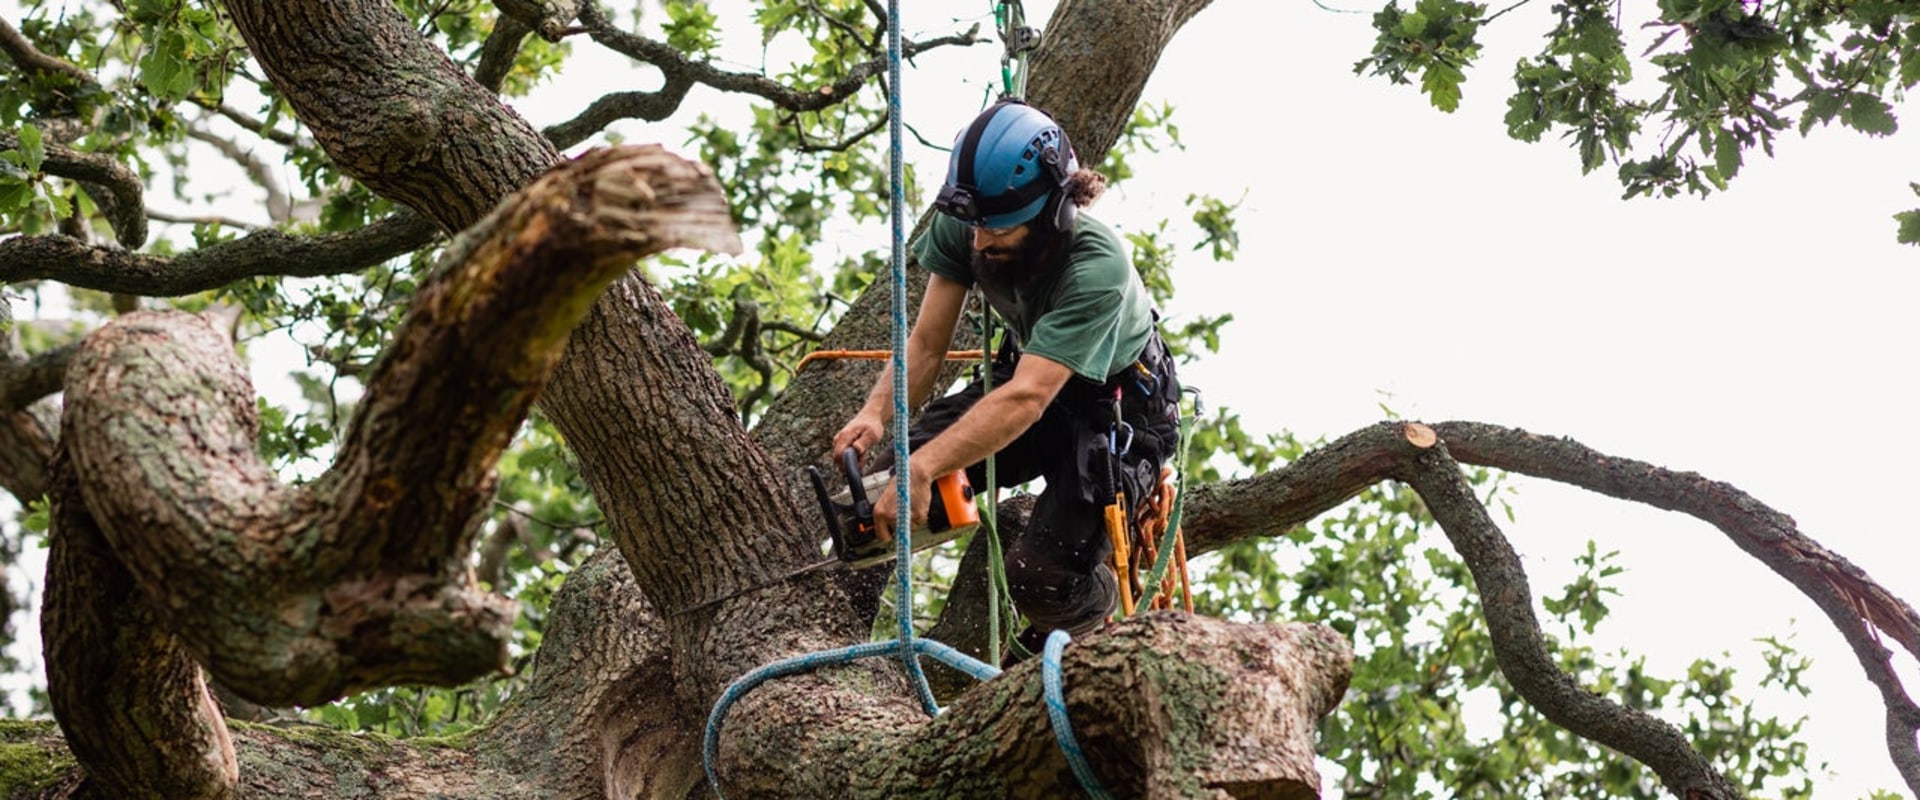 Can home insurance cover tree removal?